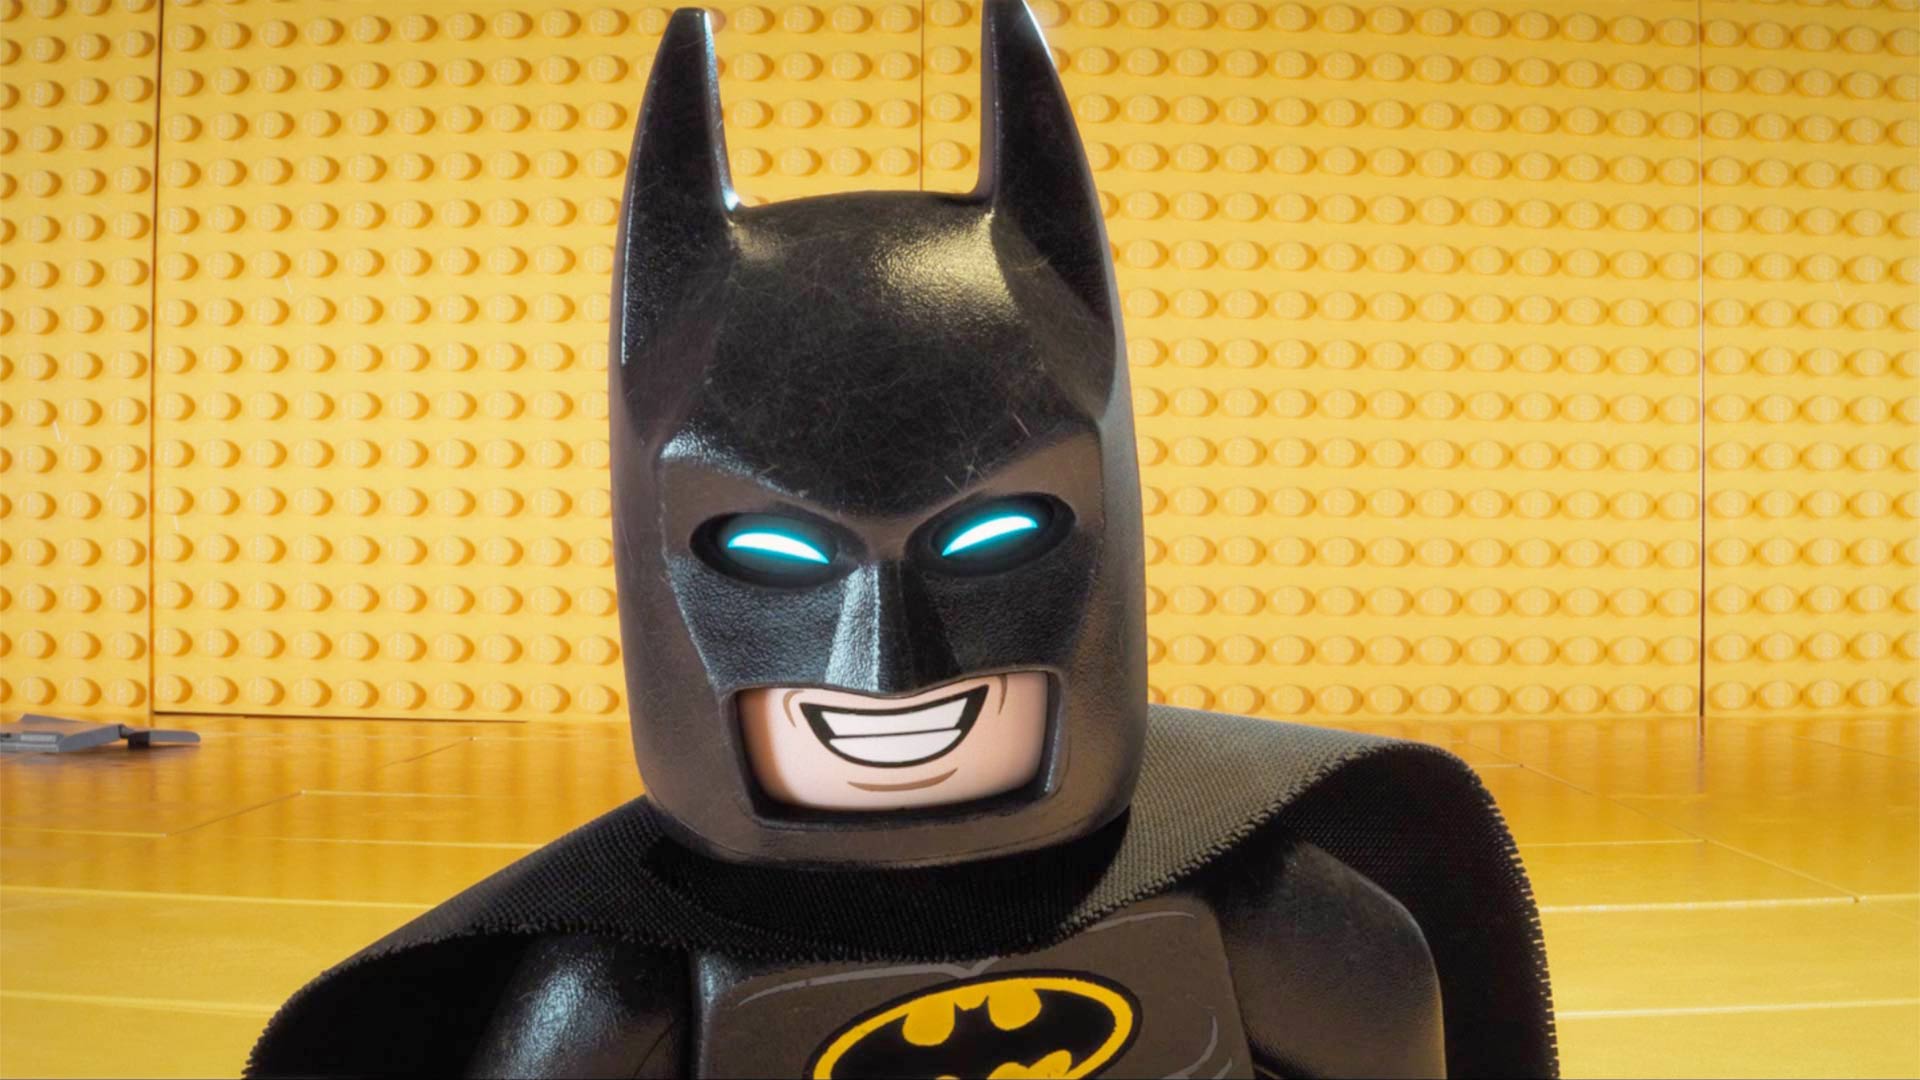 Full 'The LEGO Batman Movie' voice cast includes awesome celebrity